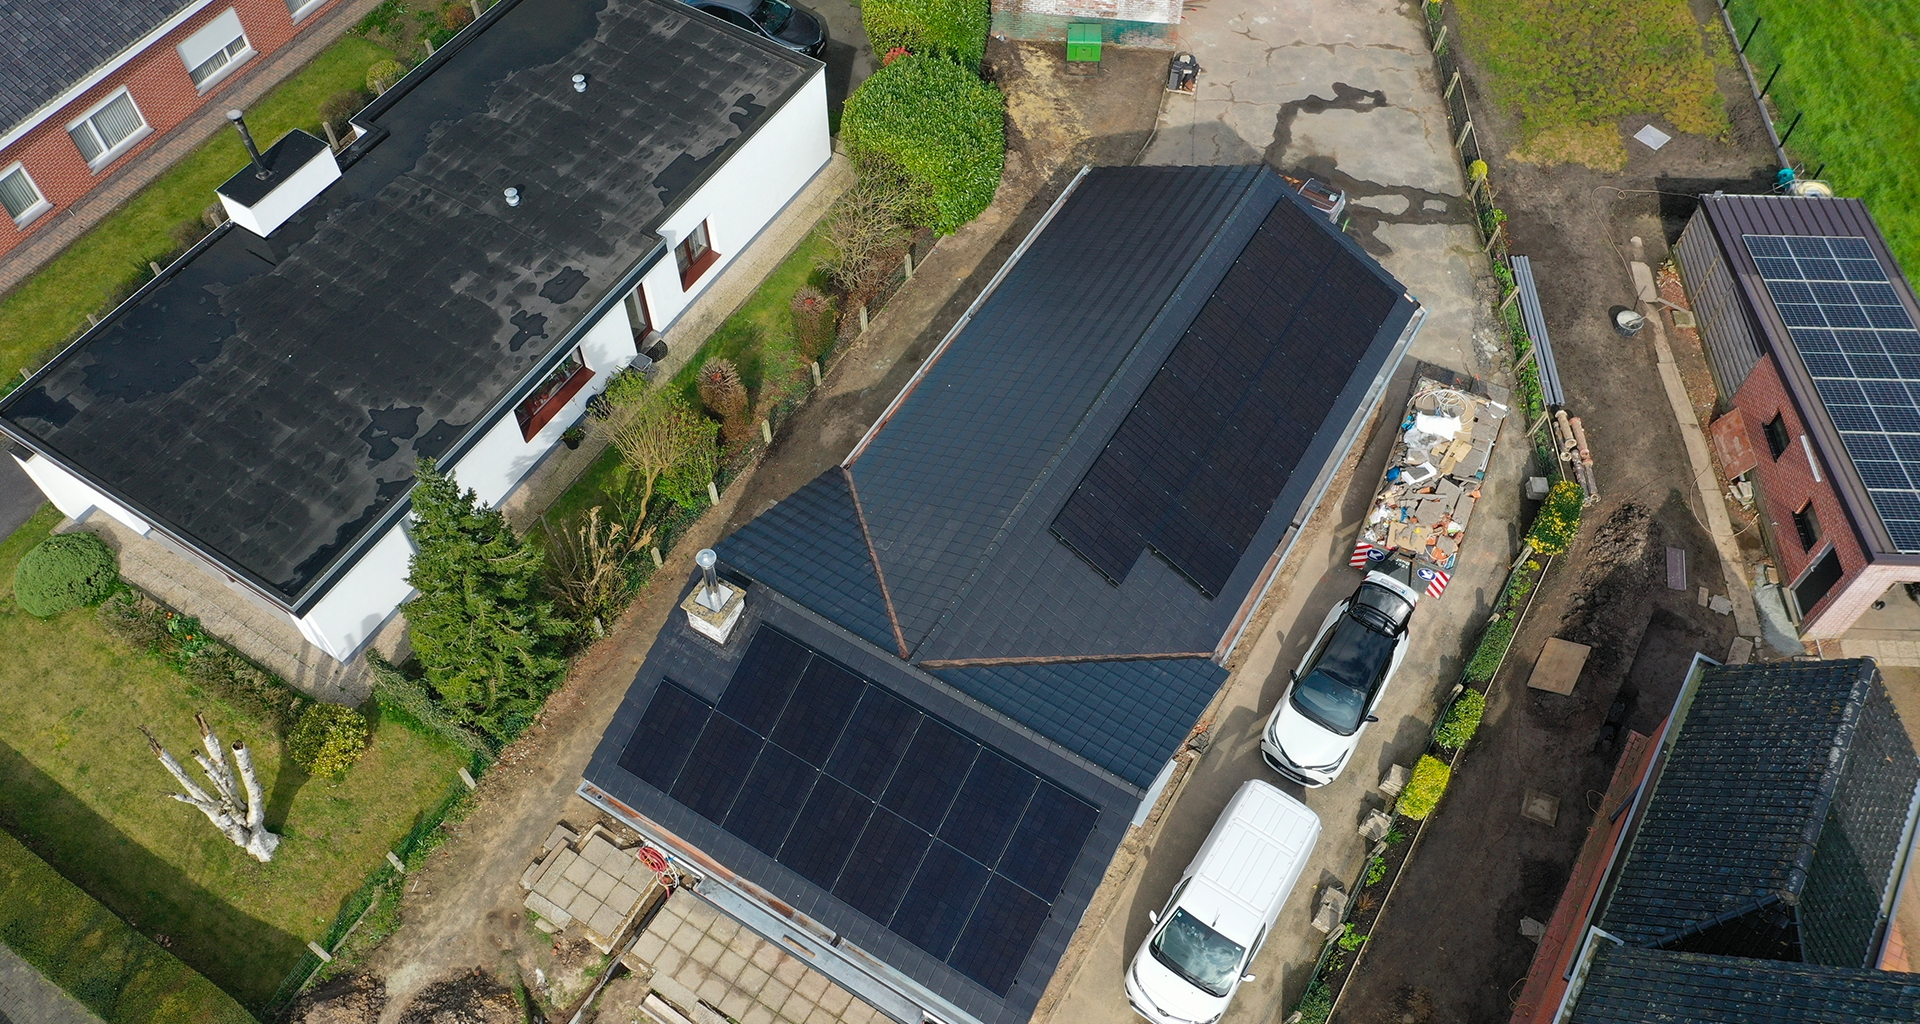 Installation of photovoltaic panels in Aalter